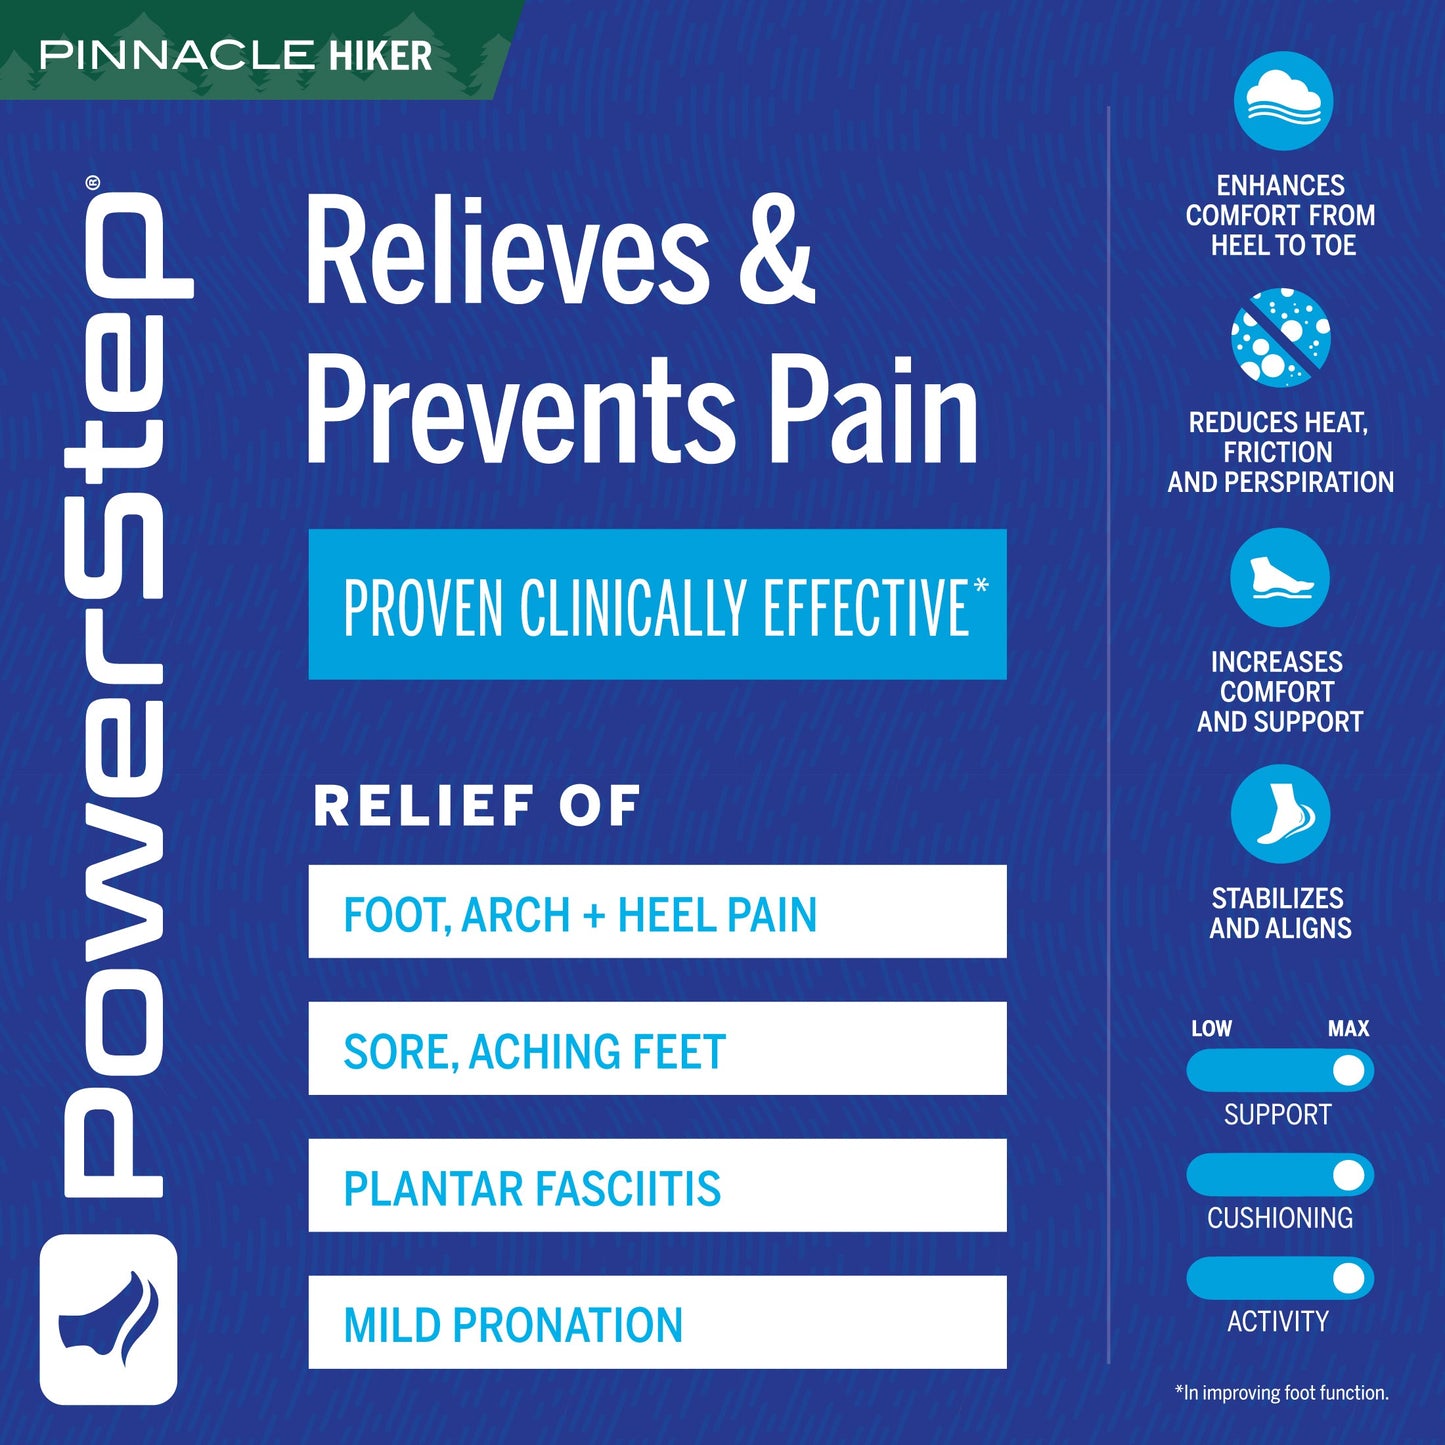 PowerStep Pinnacle Hiker Orthotic Shoe Insoles, Made in the USA with US and imported materials, pain relief and prevention, proven clinically effective for immediate relief from plantar fasciitis, mild pronation, foot, arch, and heel pain, sore, achy feet, women’s shoe inserts, men’s orthotic shoe insoles, unisex orthotic arch support insoles, enhances comfort from heel to toe, reduces heat friction and sweat, increases comfort and support, stabilizes and aligns